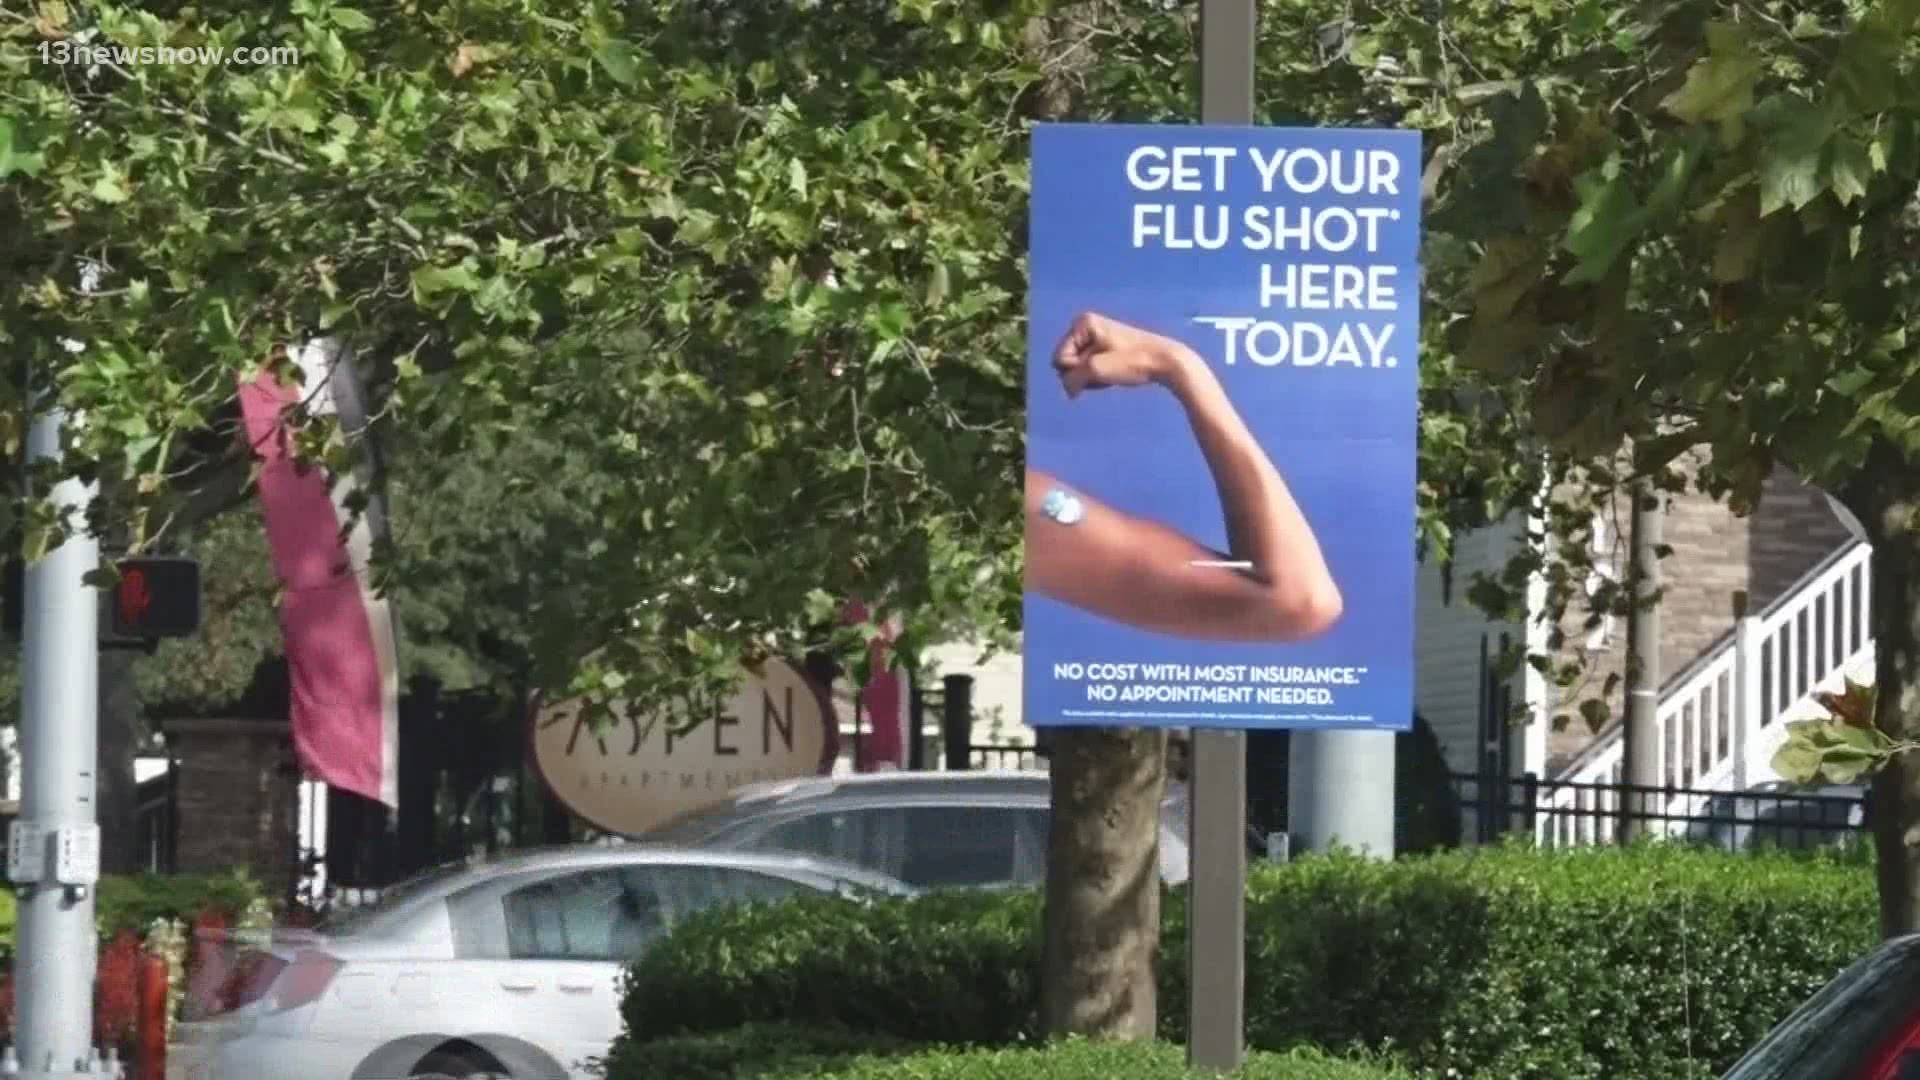 Newport News pediatrician Dr. Elizabeth Broderick asks for everyone to get the flu shot early this year.